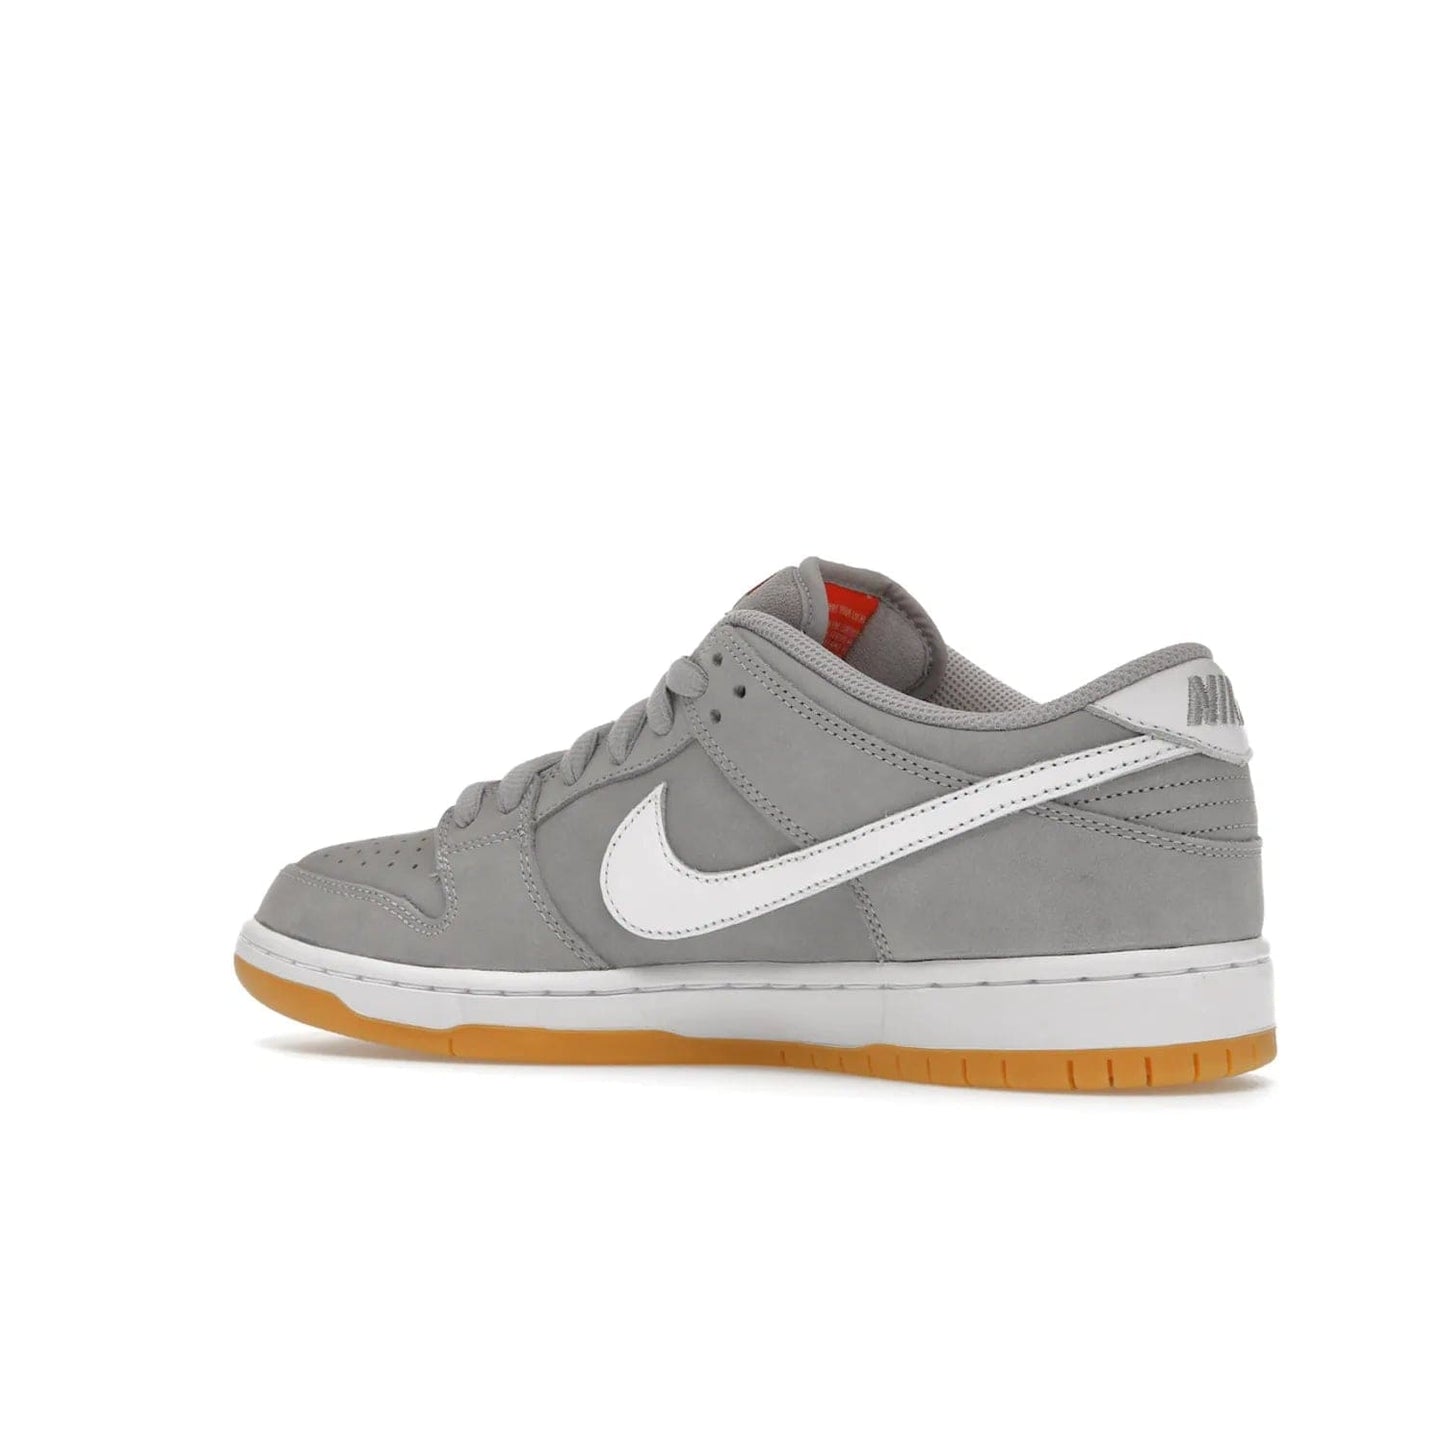 Nike SB Dunk Low Pro ISO Orange Label Wolf Grey Gum - Image 22 - Only at www.BallersClubKickz.com - Introducing Nike's SB Dunk Low Pro ISO Orange Label Wolf Grey Gum - a stylish shoe with a premium Wolf Grey upper, white leather Nike Swoosh, and an eye-catching gum outsole. With special Nike branding and packaging, this shoe adds a unique fashion statement. Out Feb. 24, 2023.